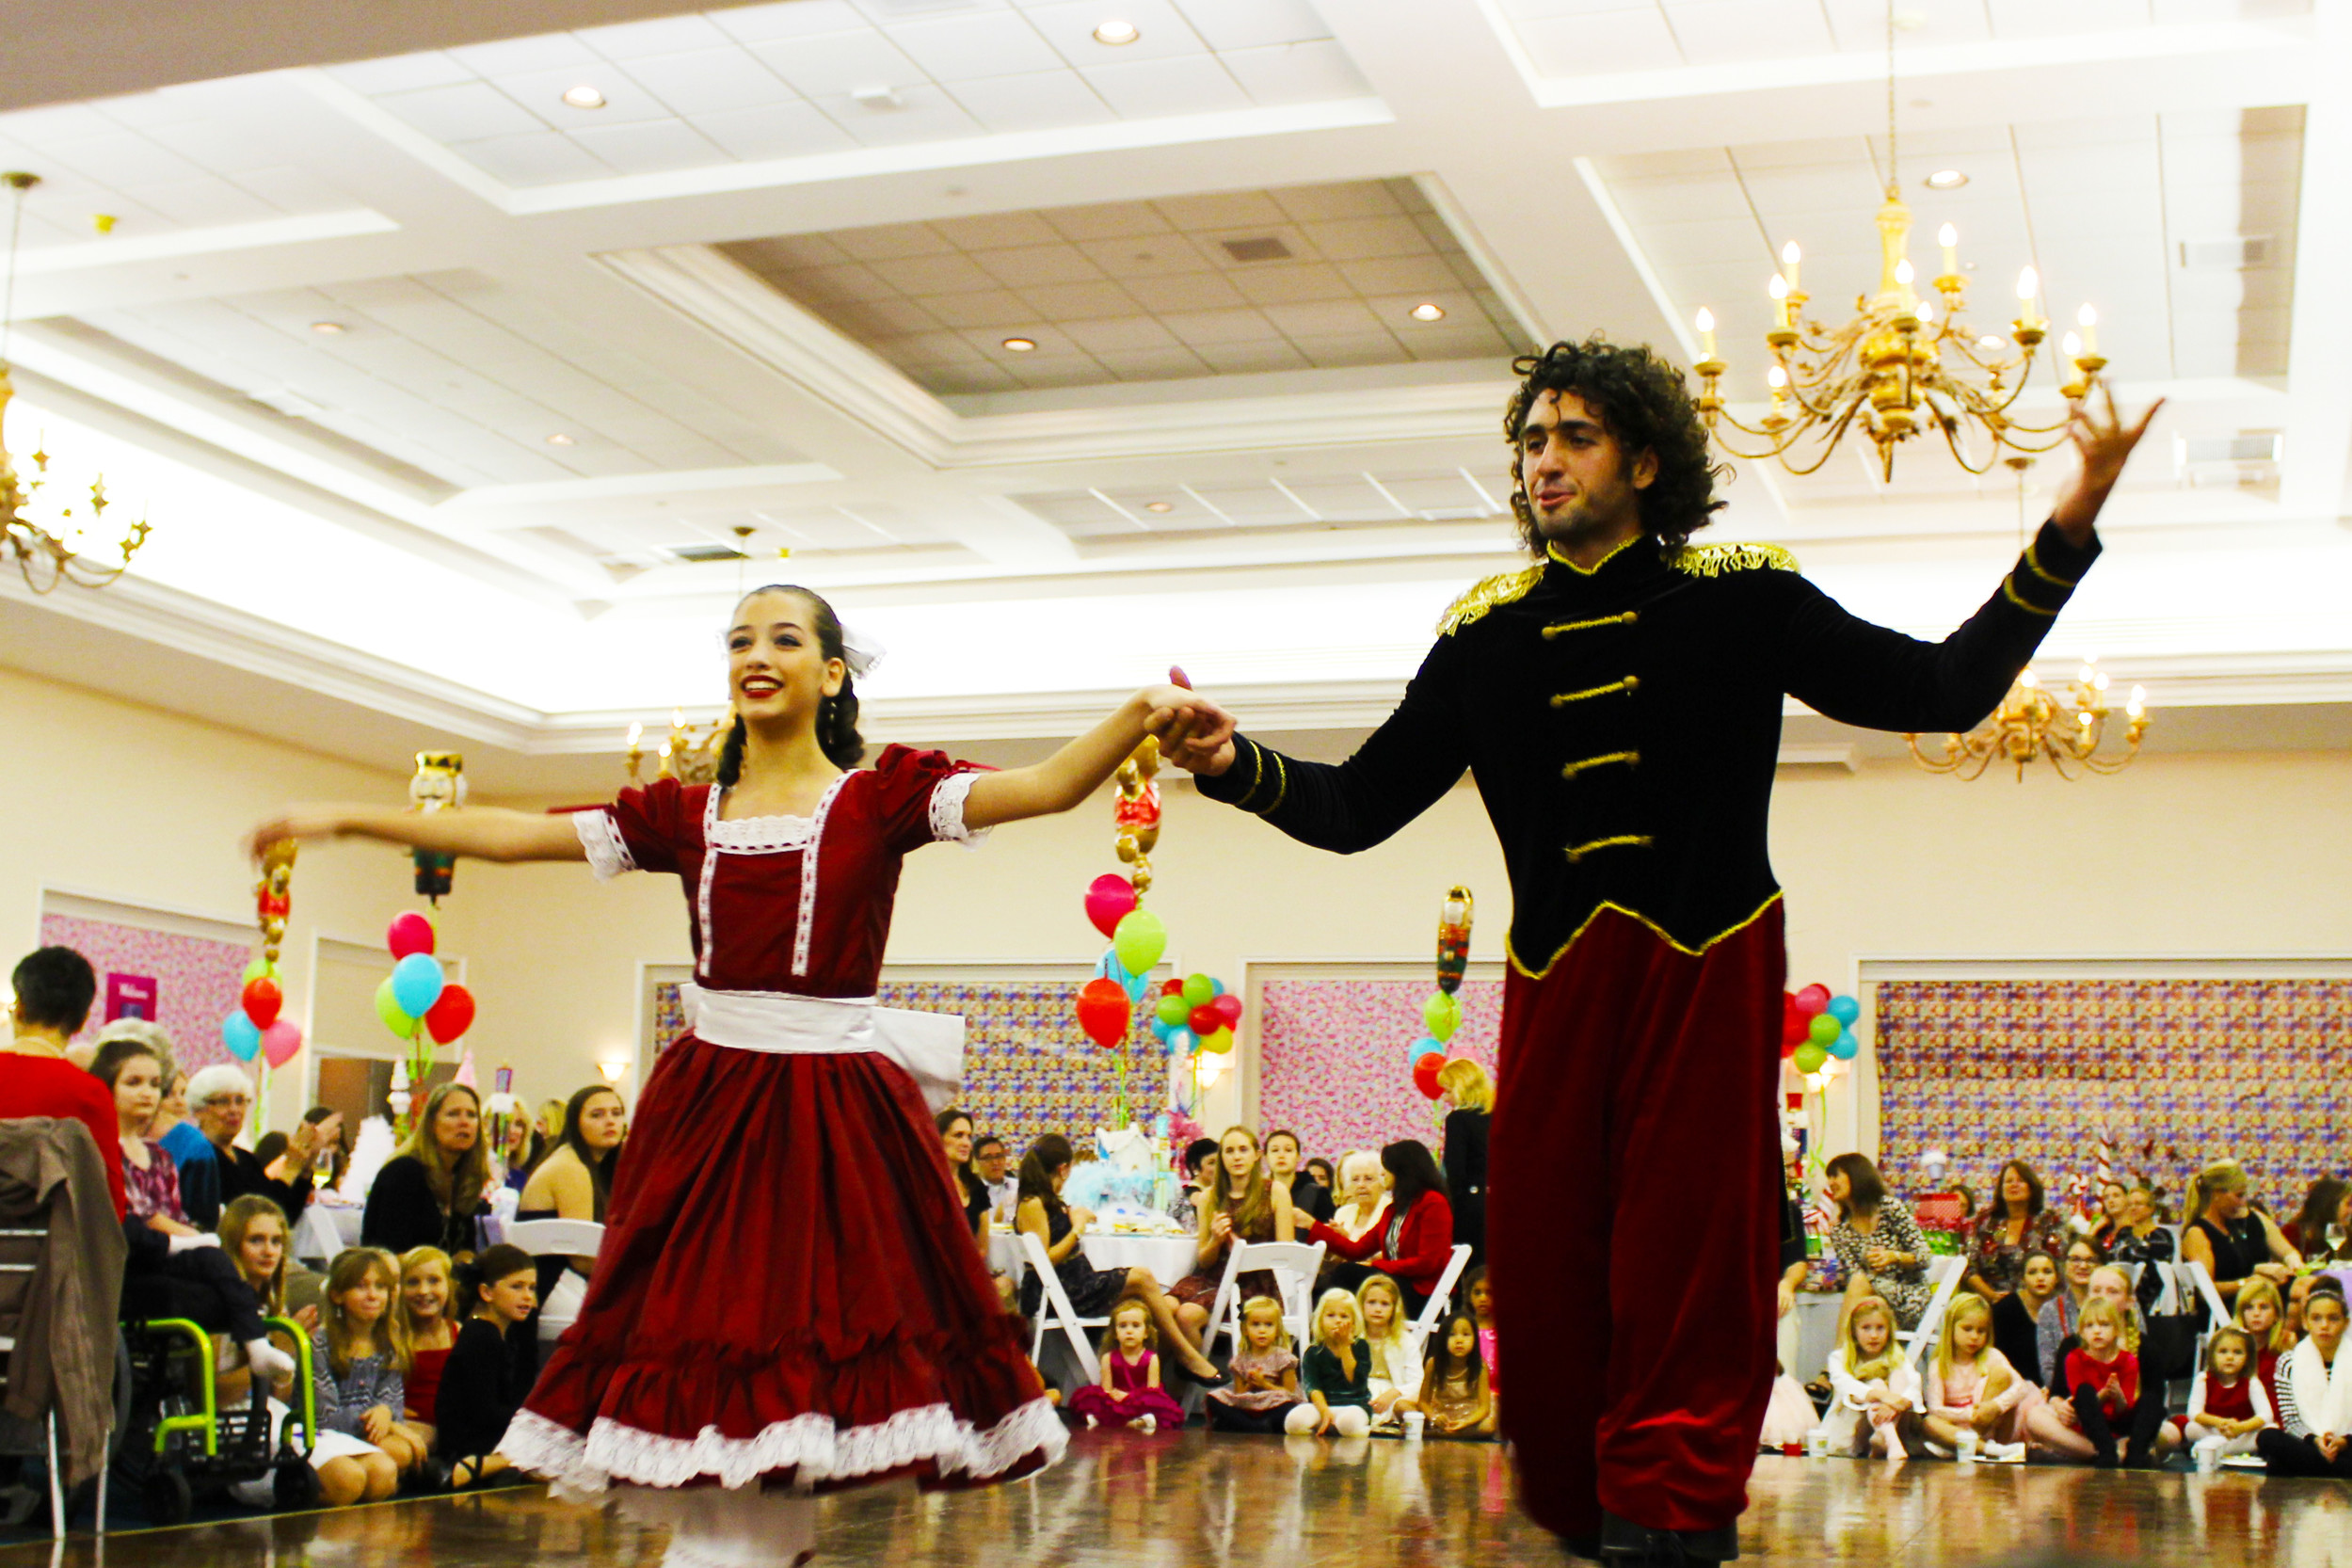 The Nutcracker Tea also serves to introduce the two dancers who will portray Clara and the Prince on stage this year.